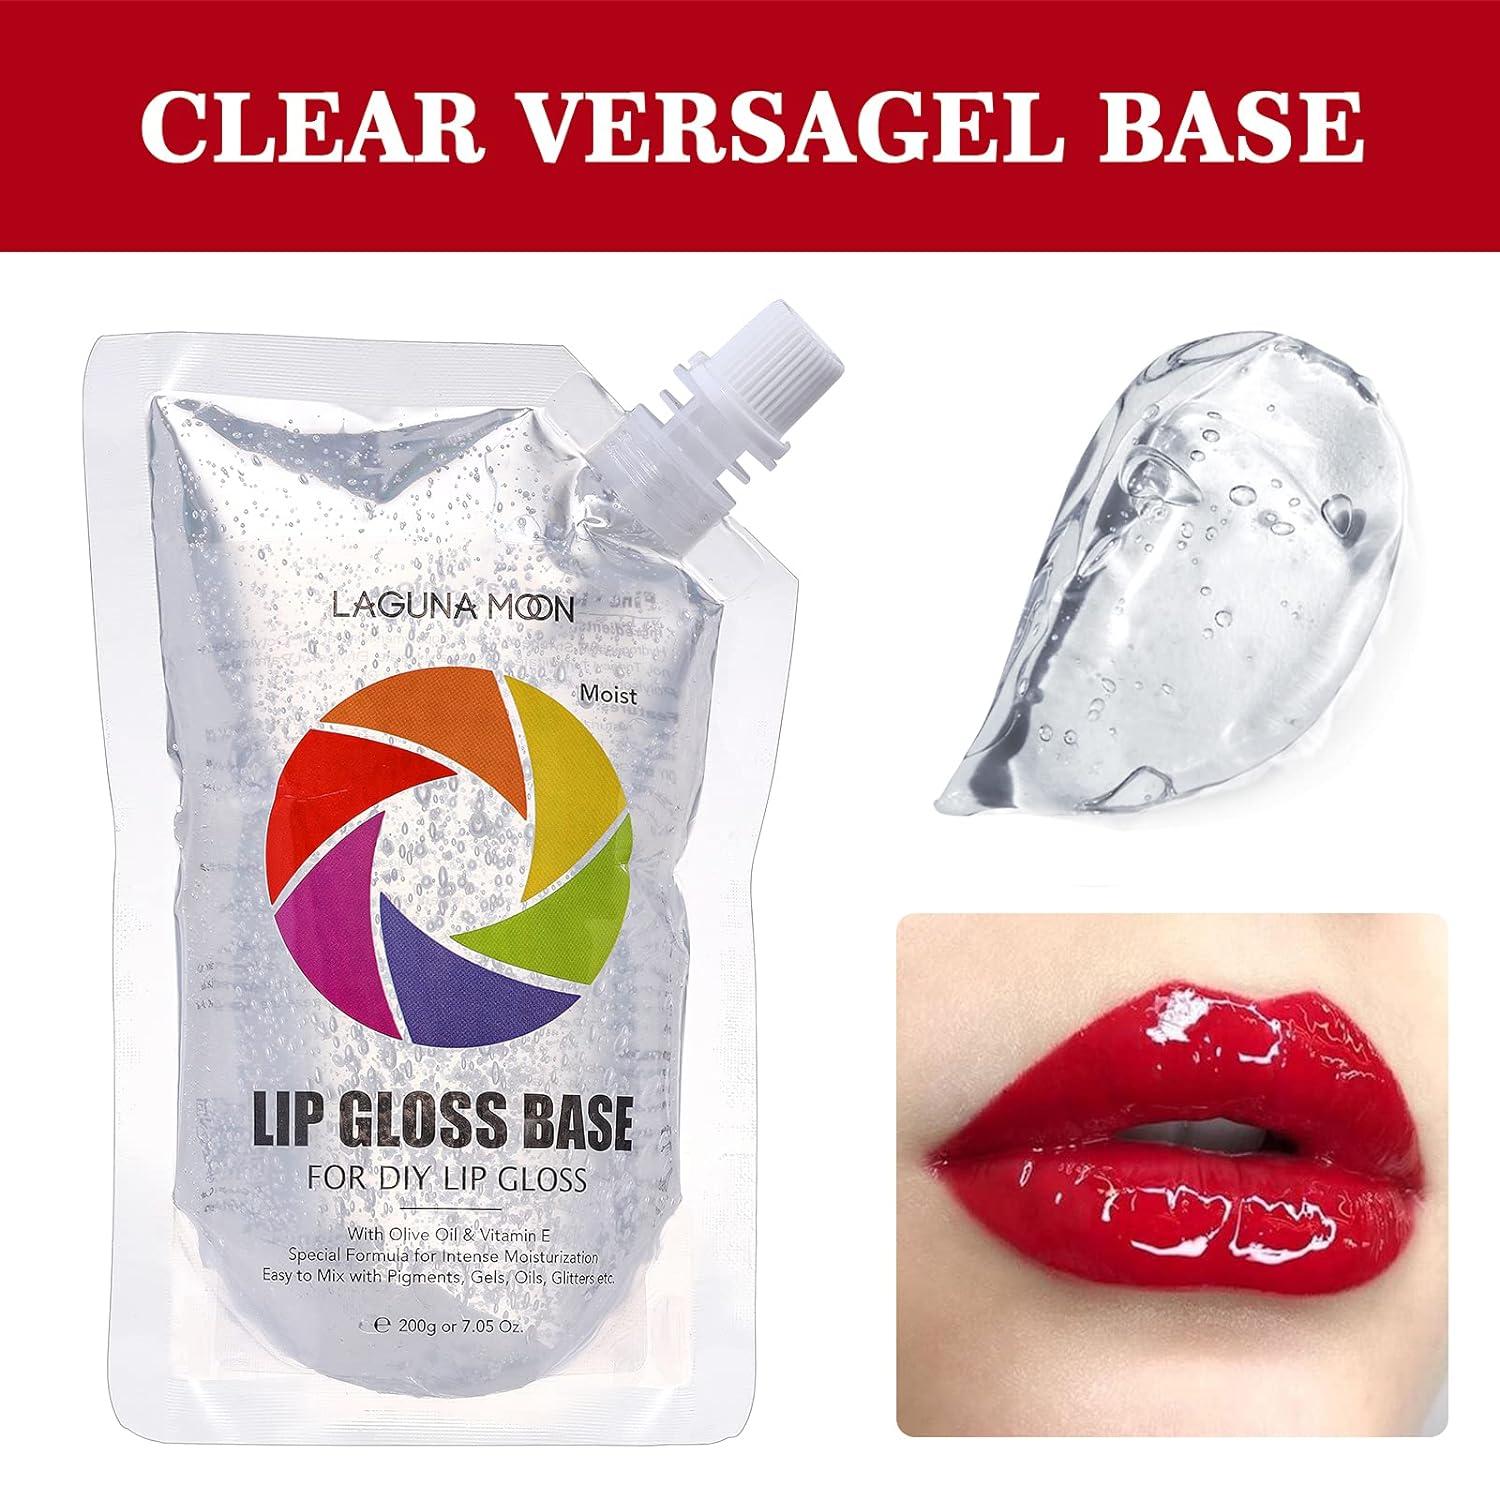 Clear Lip Gloss Base for DIY Lip Gloss Making Kit - 14.1oz Versagel with  Olive Oil & Vitamin E for Smooth Hydrated Moisturized Lips - Fragrance-Free  Safe for Sensitive Skin Small Business